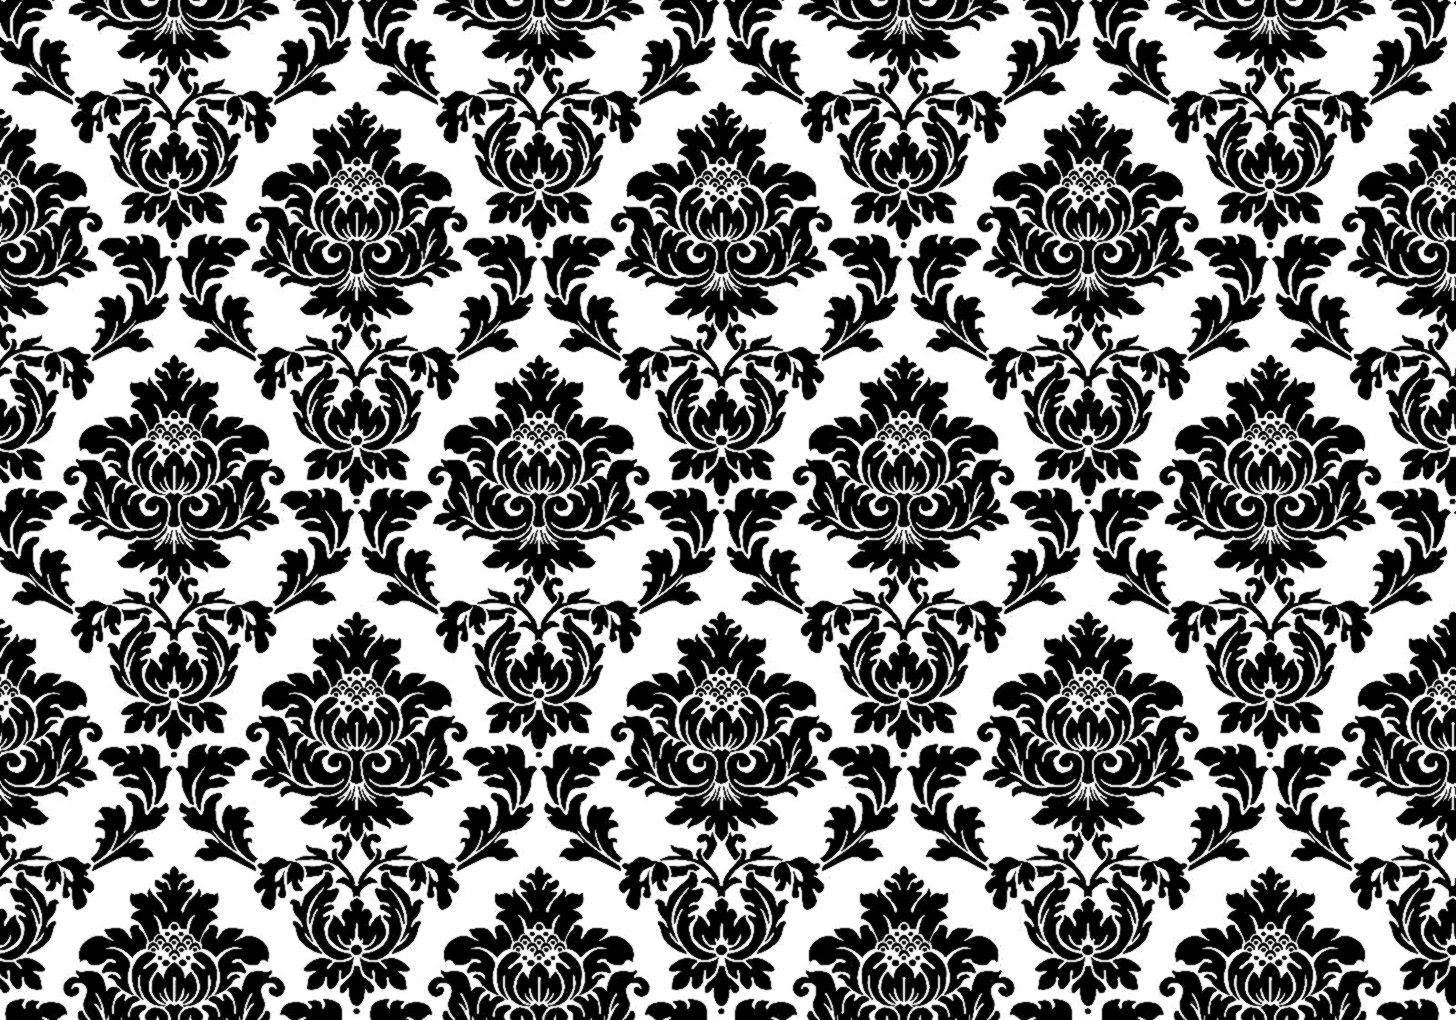 Damask Black And White Wallpaper Cool HD Wallpapers 1456x1020